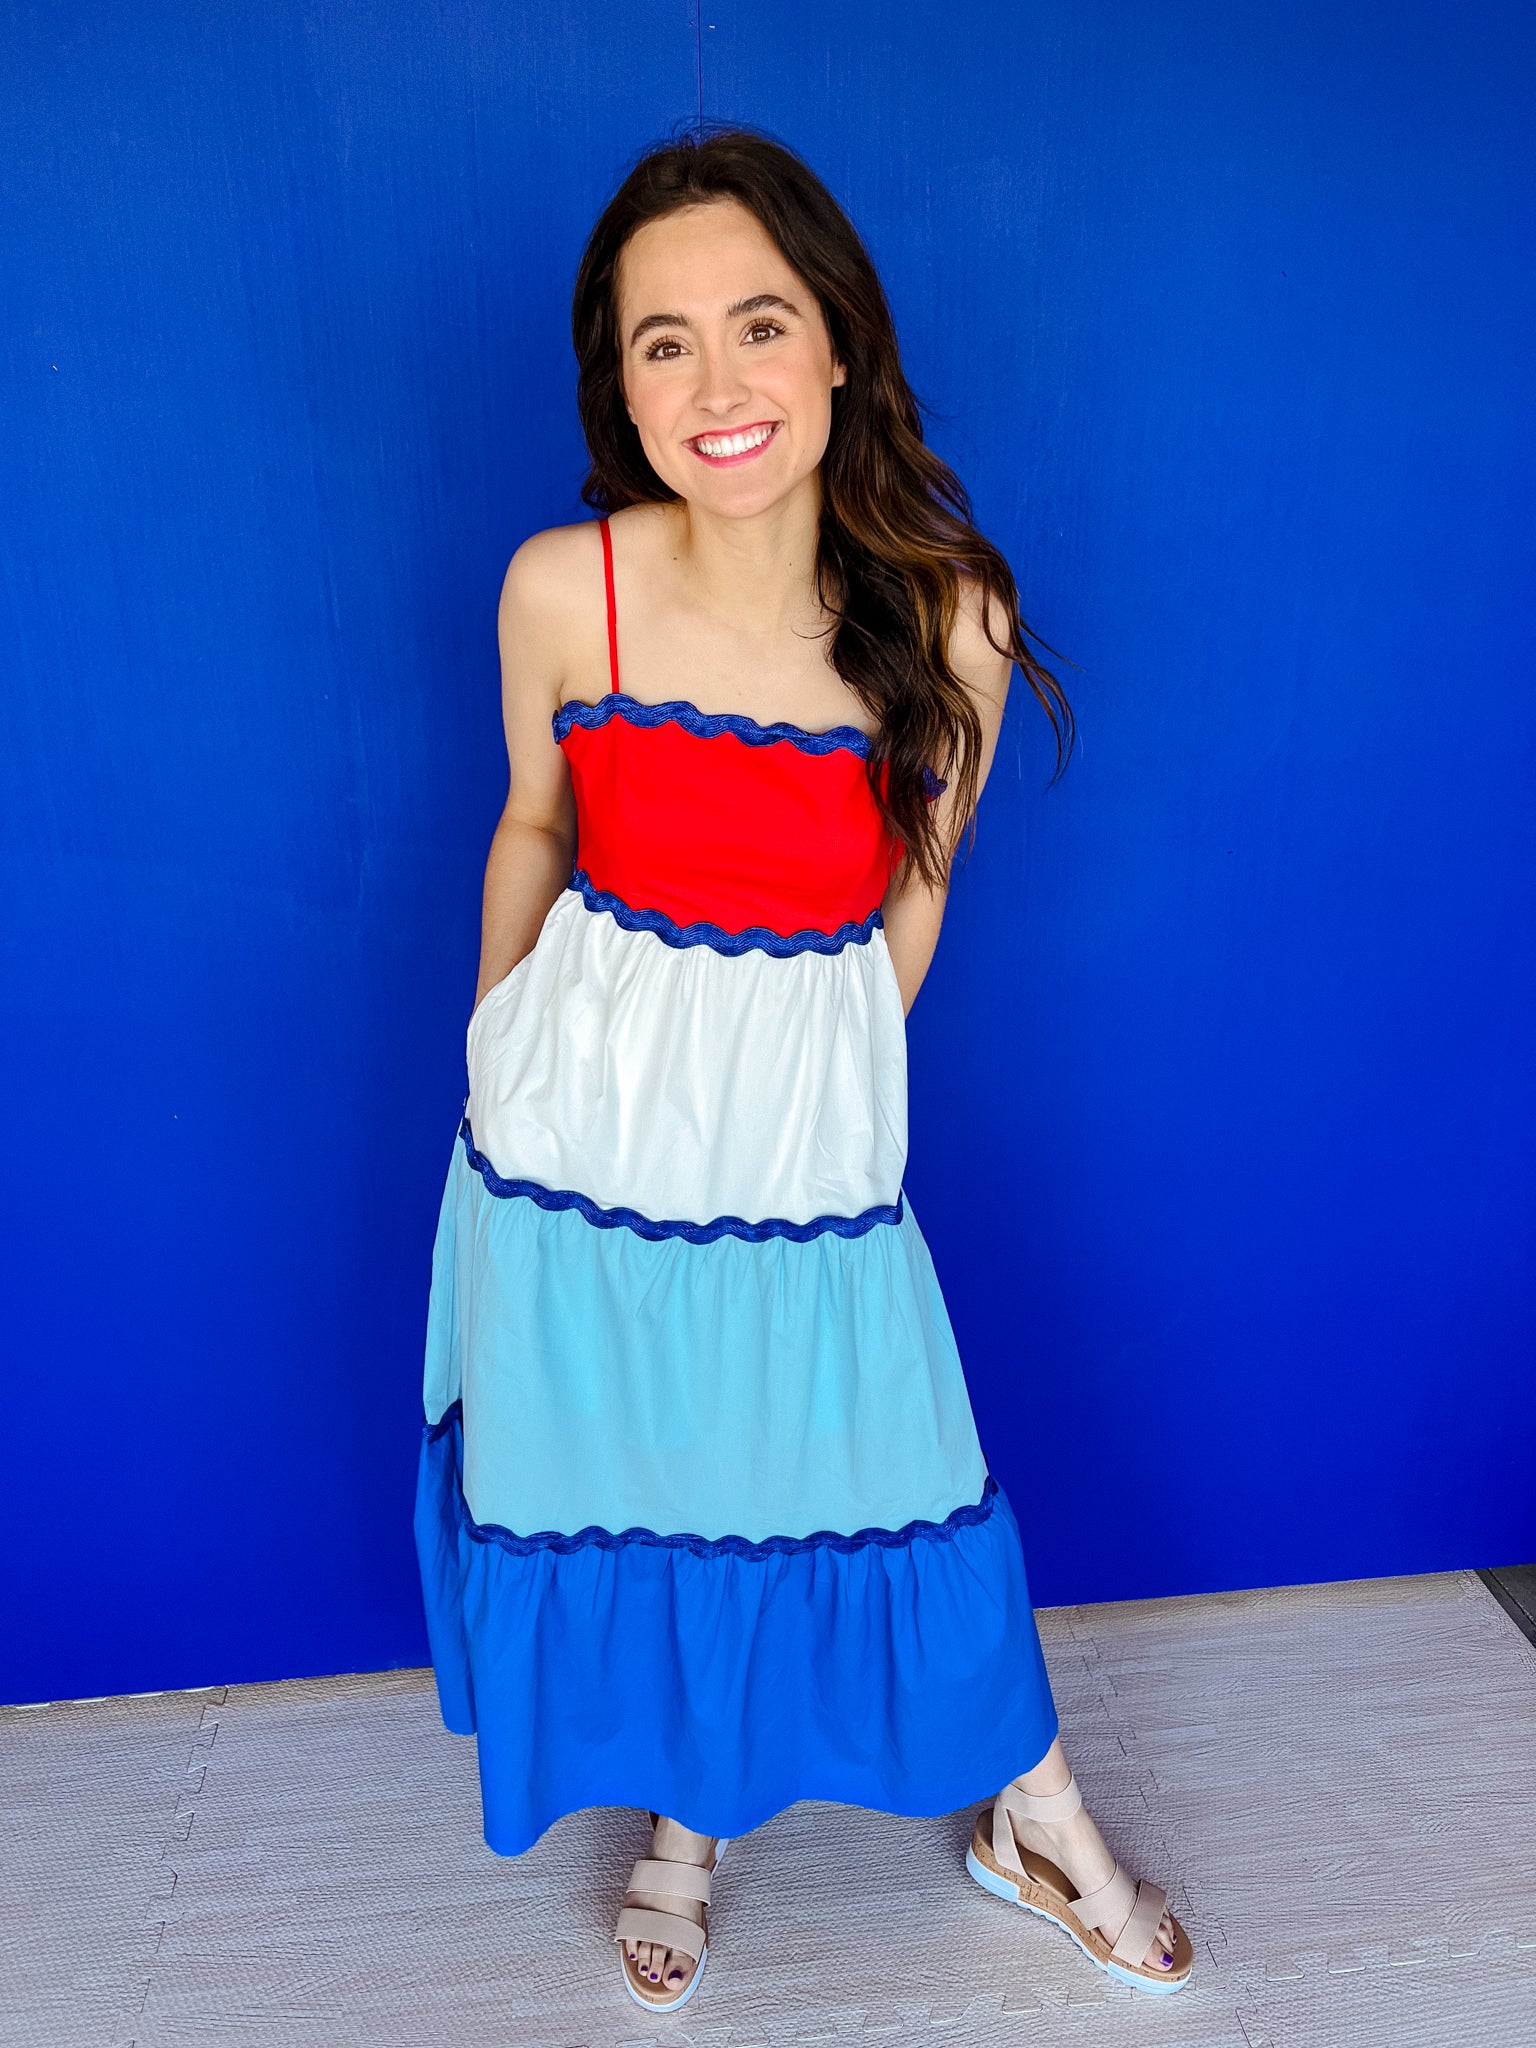 Americana Tiered Dress - Cool Red + White + Blue